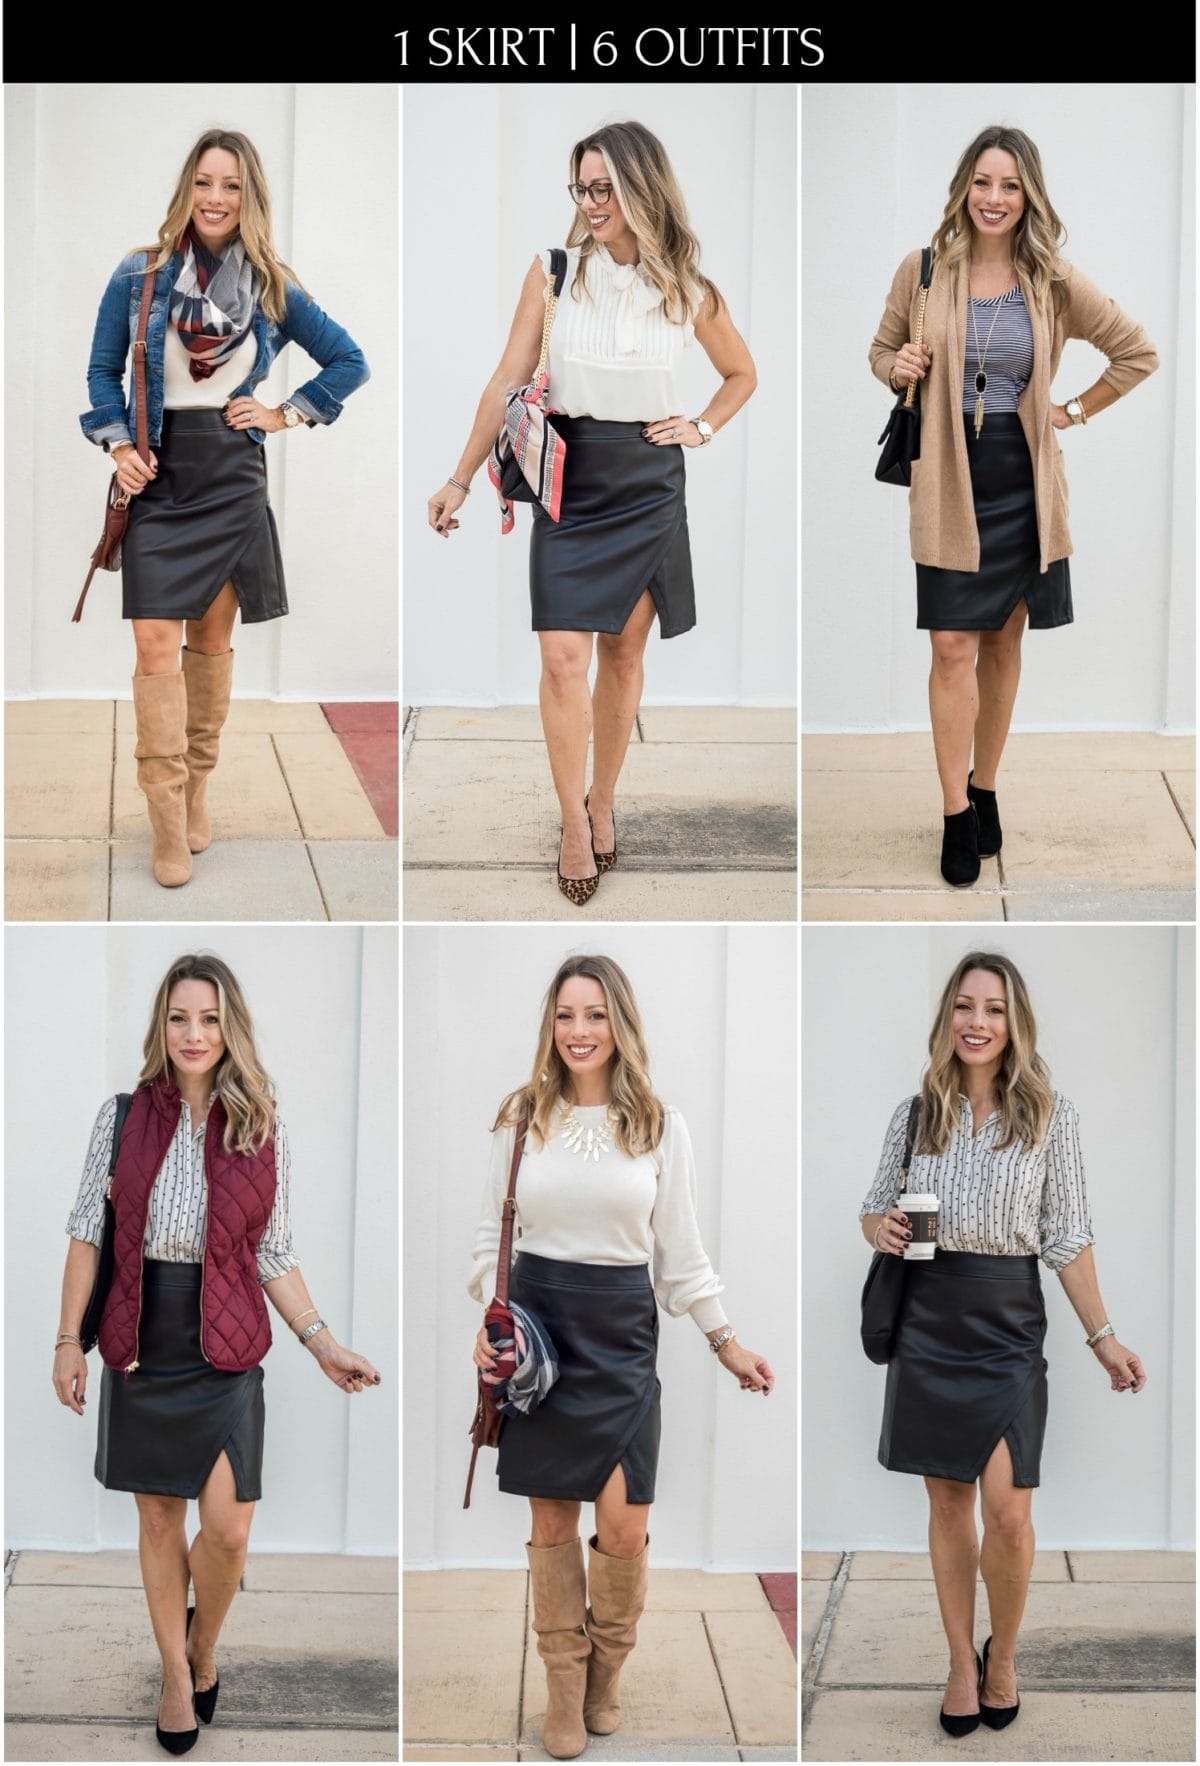 6 Black Leather Skirt Outfit Ideas For Fall - Honey We're Home